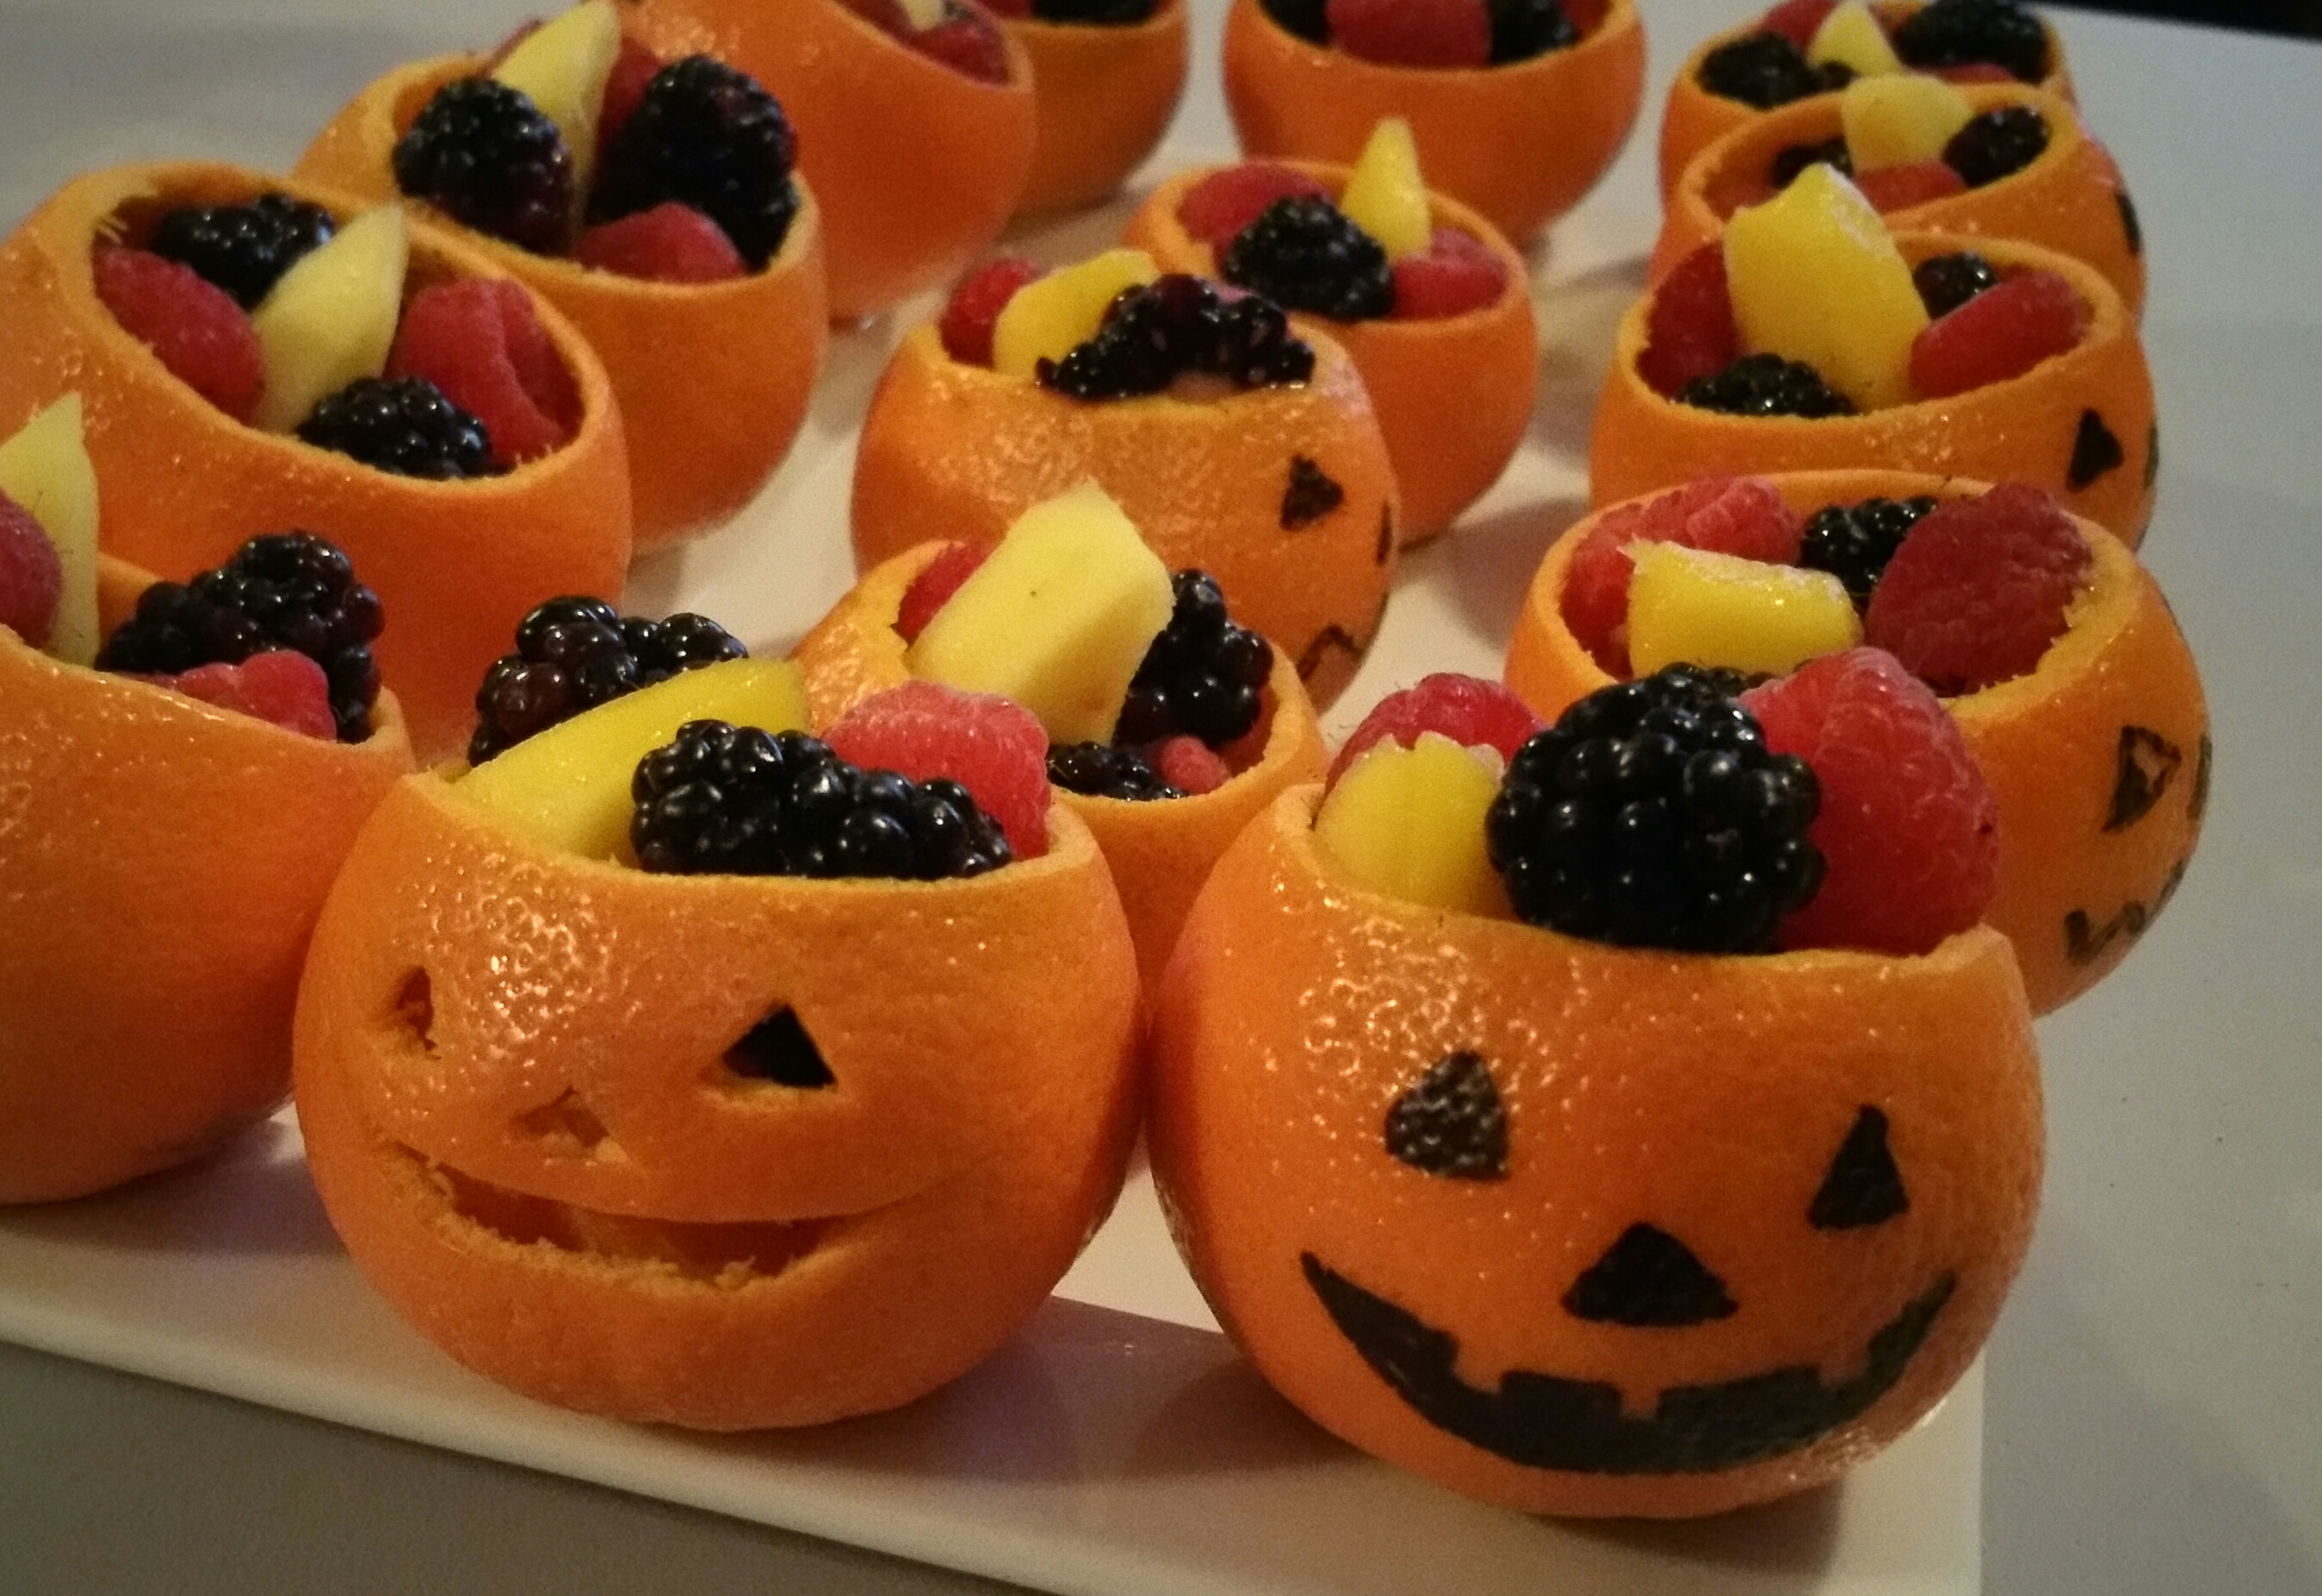 Image result for halloween fruit ideas